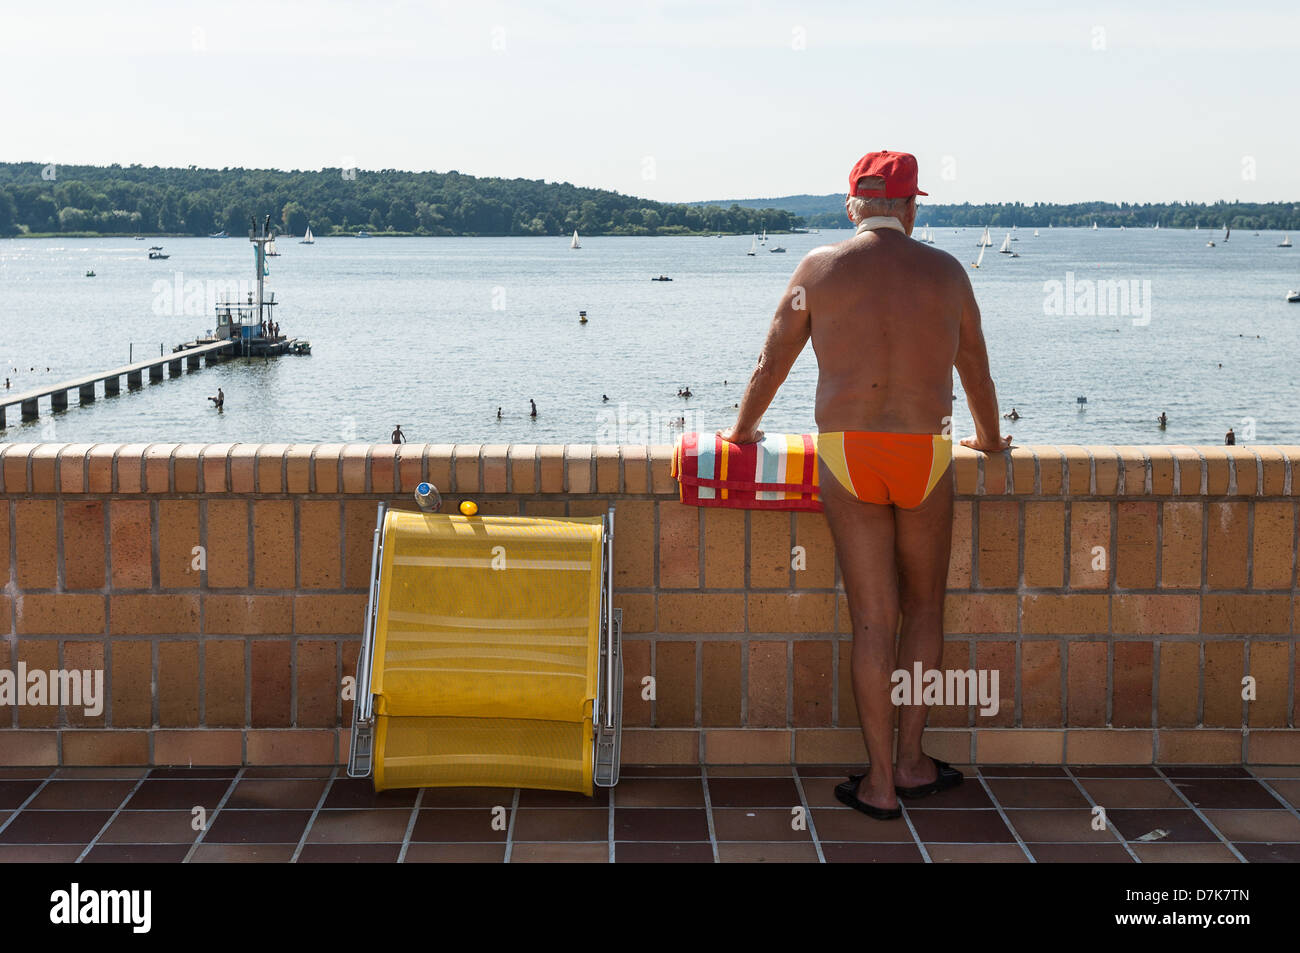 Berlin, Germany, visitor looks from the sun deck of the Wannsee lido on the beach Stock Photo